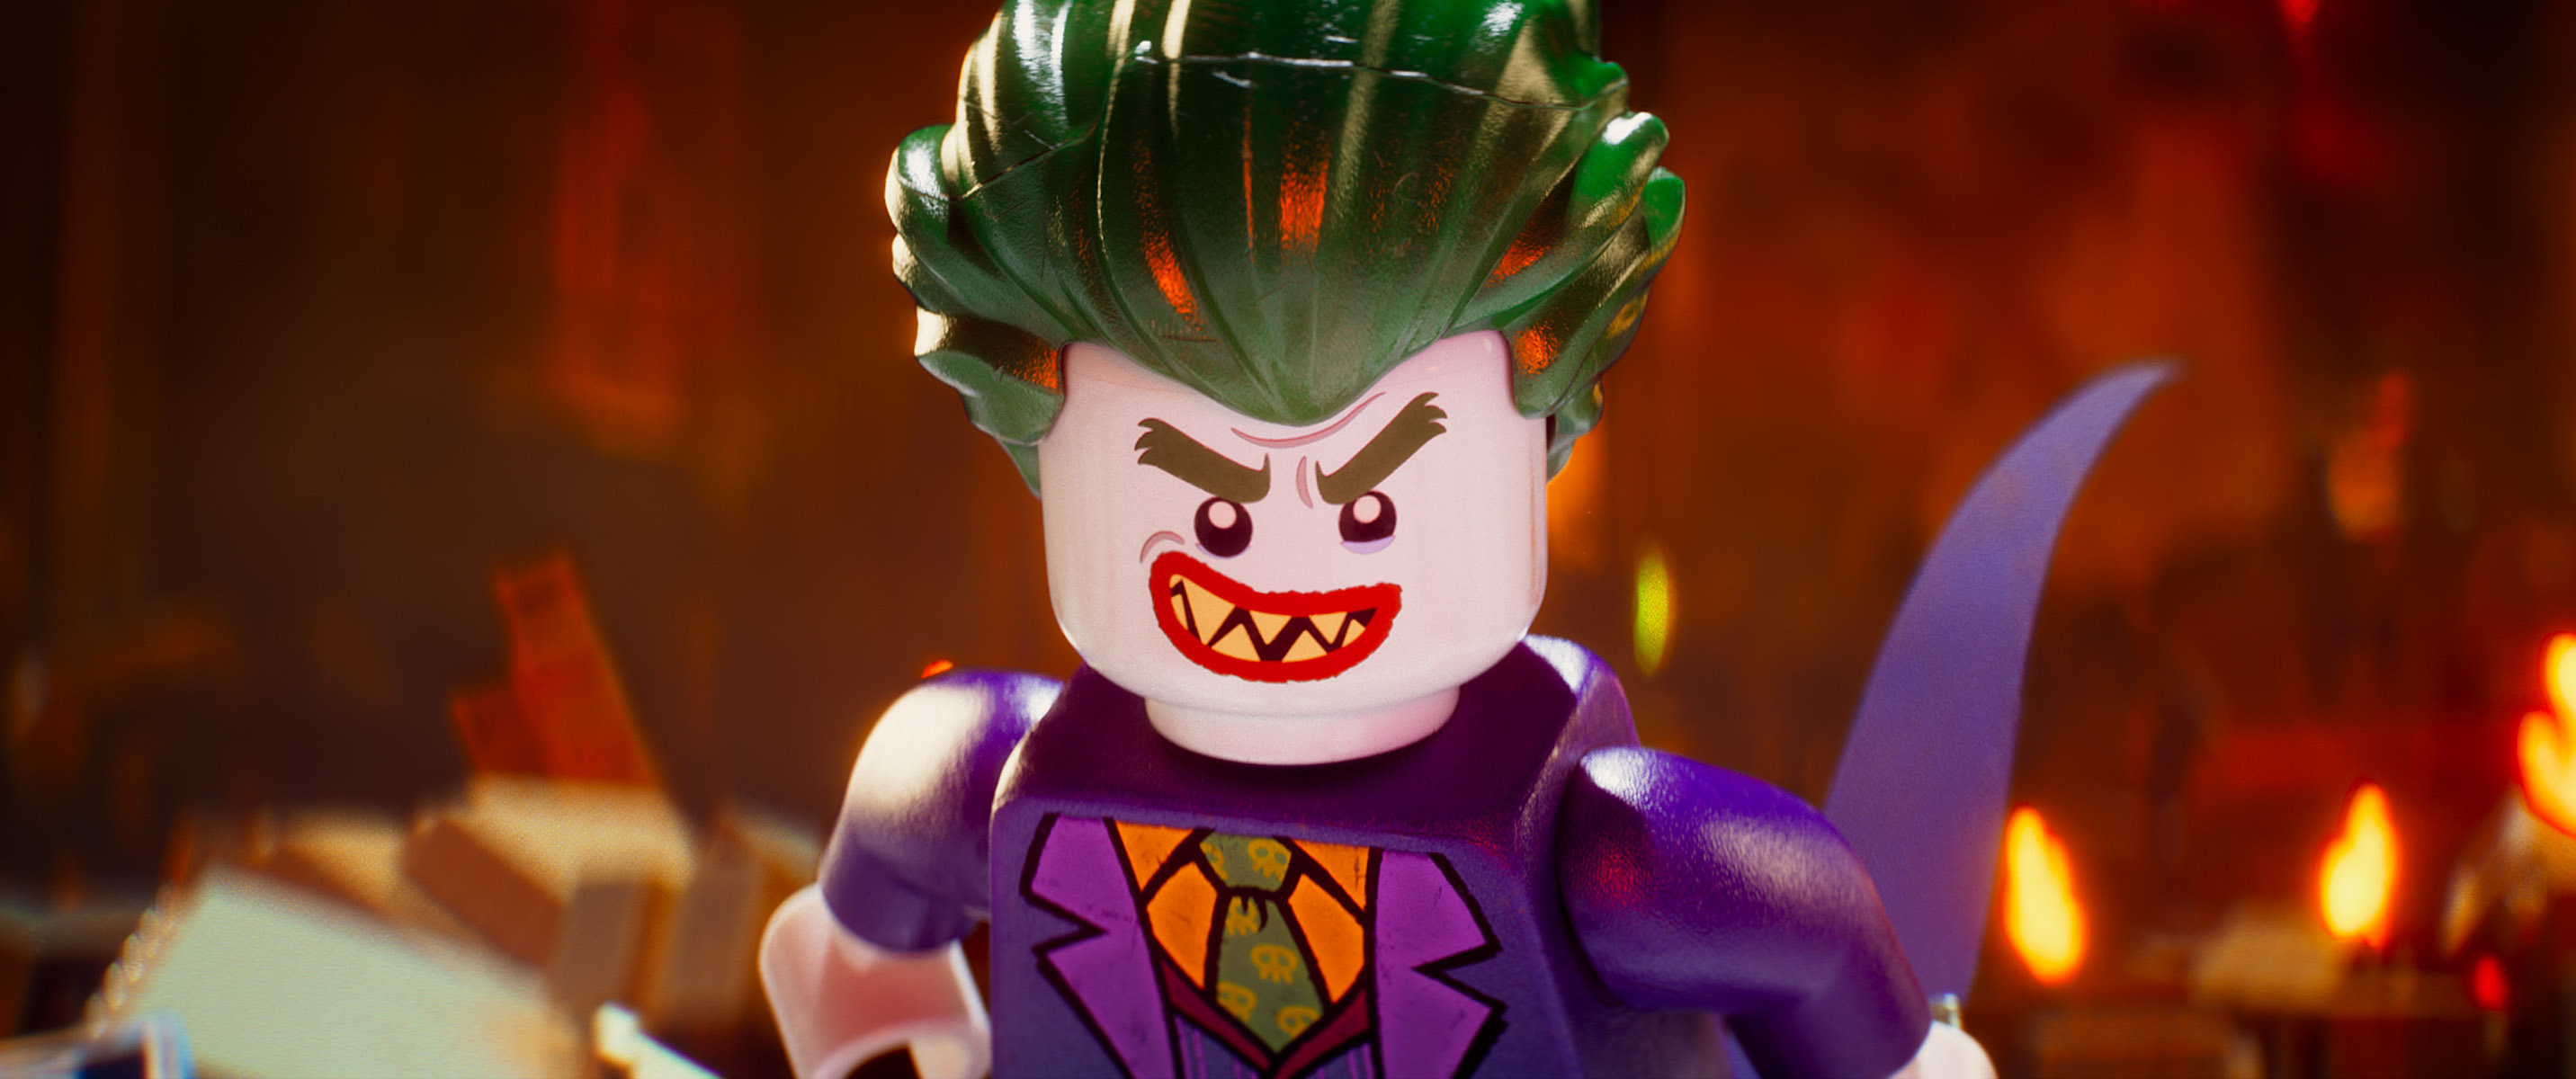 Lego Batman Movie flip the truck, Exciting scene, Jaw-dropping moment, Breath-taking action, 2870x1200 Dual Screen Desktop